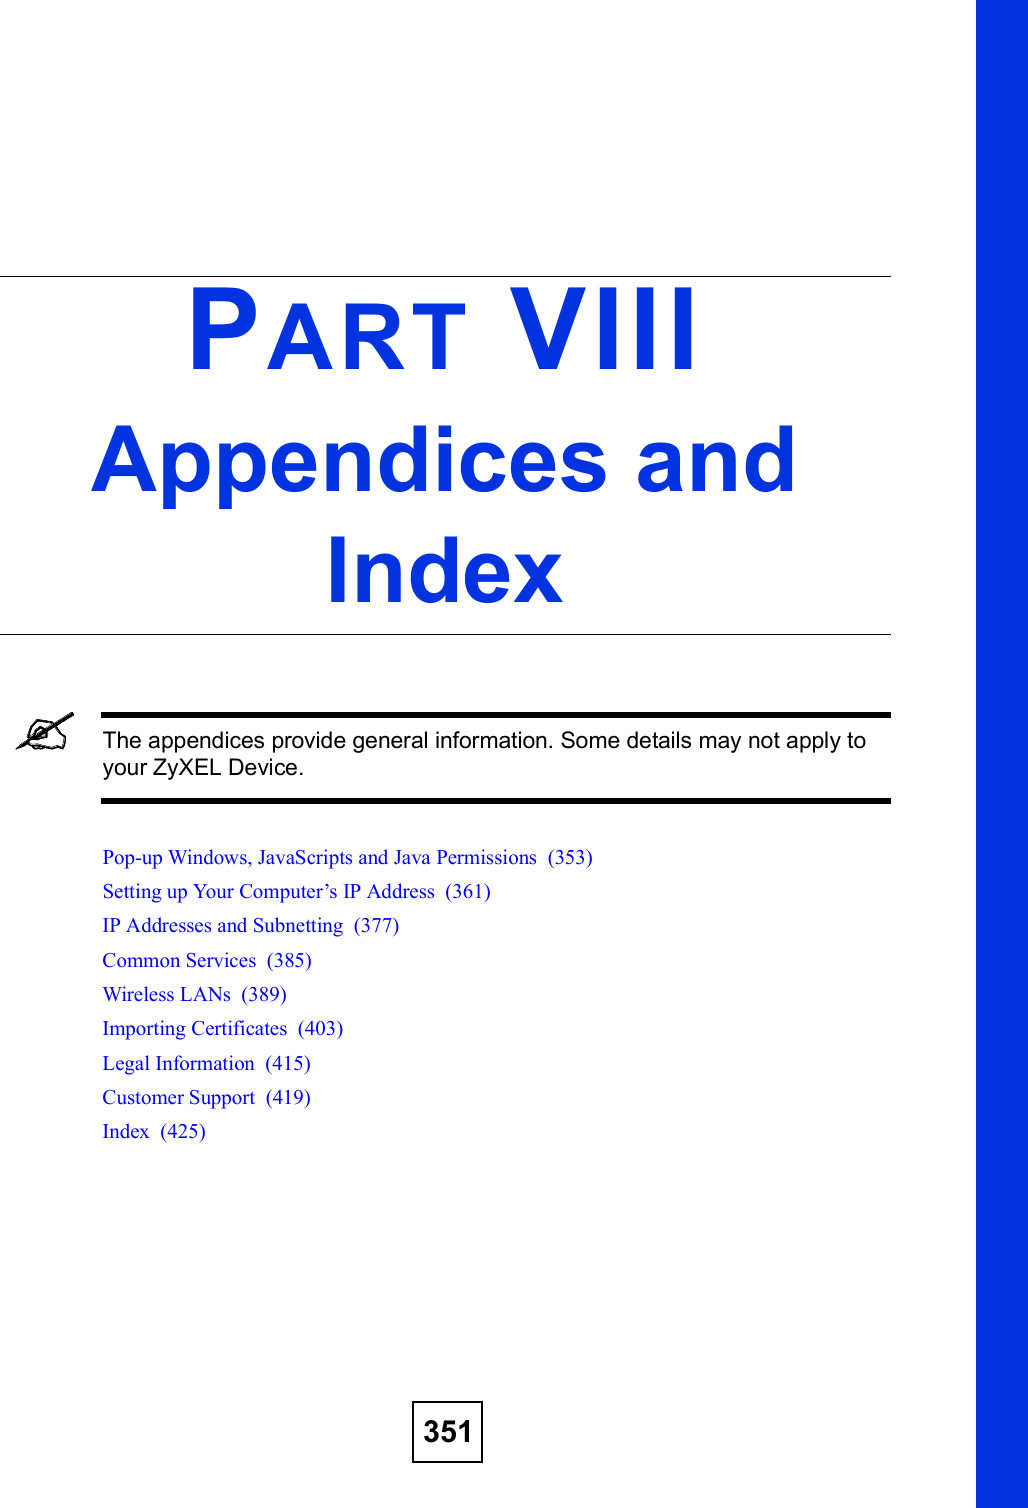 351PART VIIIAppendices and IndexThe appendices provide general information. Some details may not apply to your ZyXEL Device.Pop-up Windows, JavaScripts and Java Permissions  (353)Setting up Your Computer!s IP Address  (361)IP Addresses and Subnetting  (377)Common Services  (385)Wireless LANs  (389)Importing Certificates  (403)Legal Information  (415)Customer Support  (419)Index  (425)